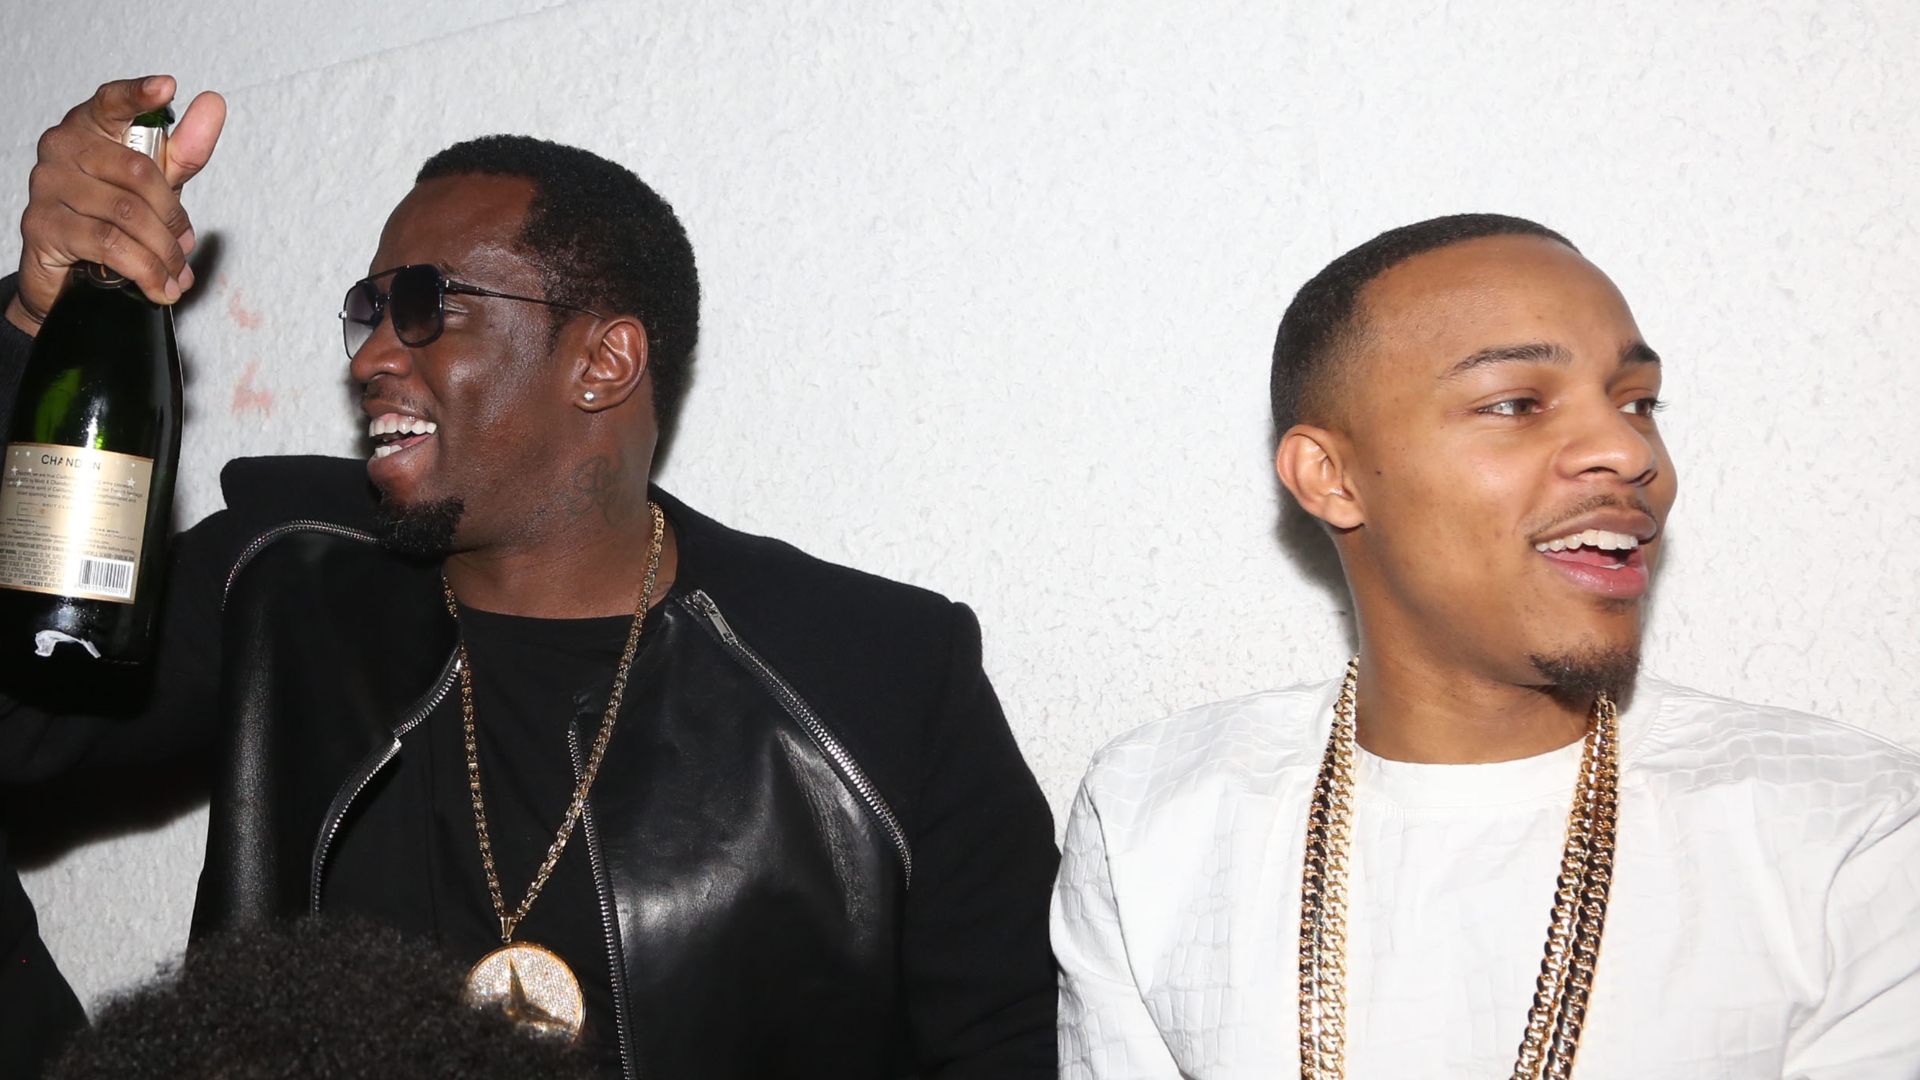 https://img.buzzfeed.com/buzzfeed-static/complex/images/zxrlsqwhp7ithjb622ai/bow-wow-speaks-on-ex-joie-chavis-hanging-out-with-diddy-some-things-are-off-limits.jpg